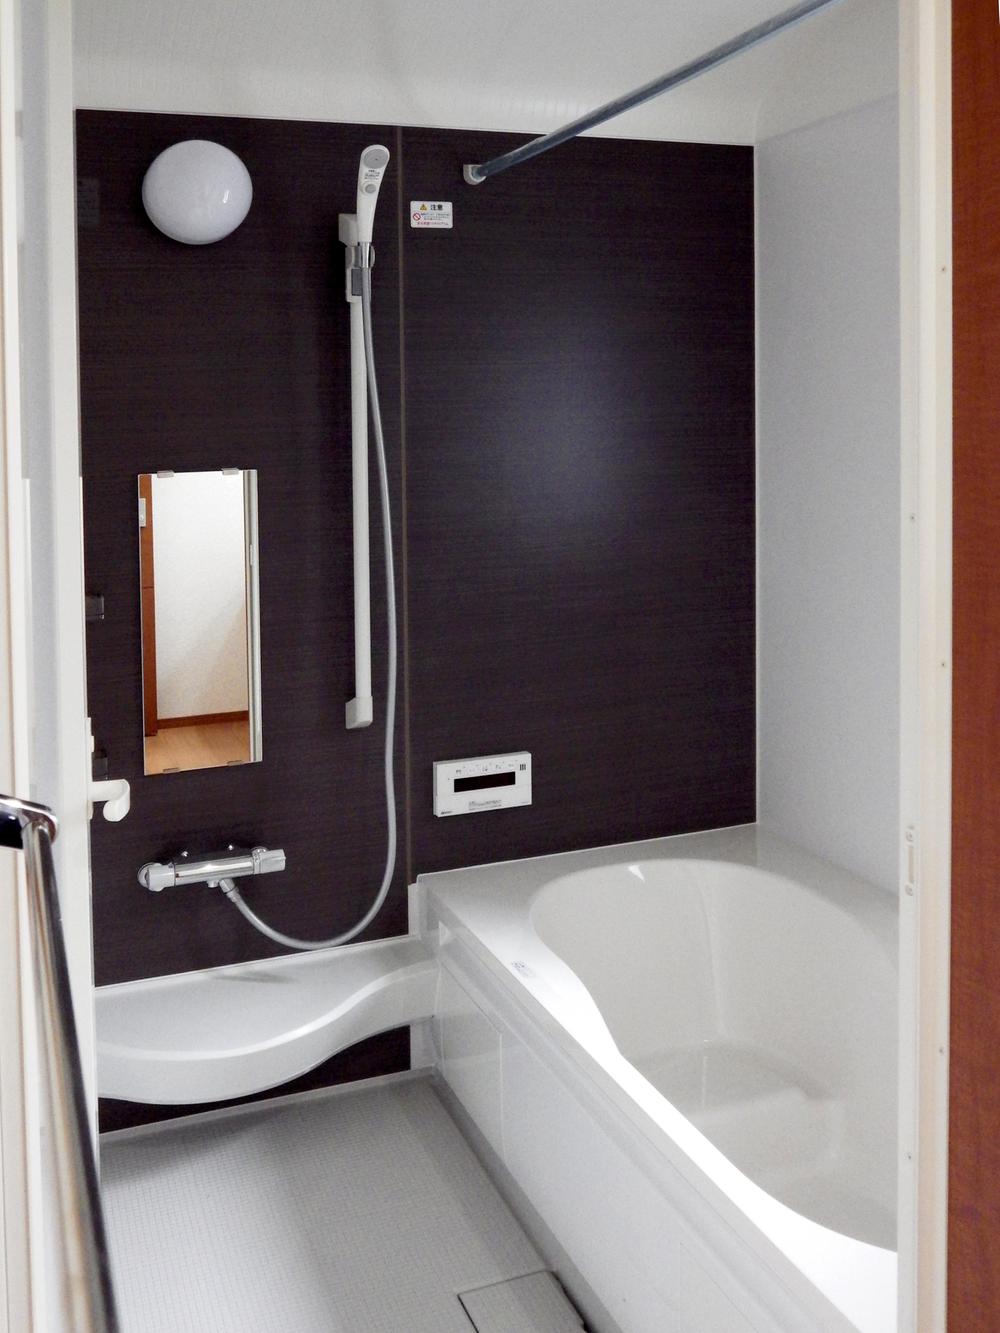 Same specifications photo (bathroom). It is a bathroom of the same specification.